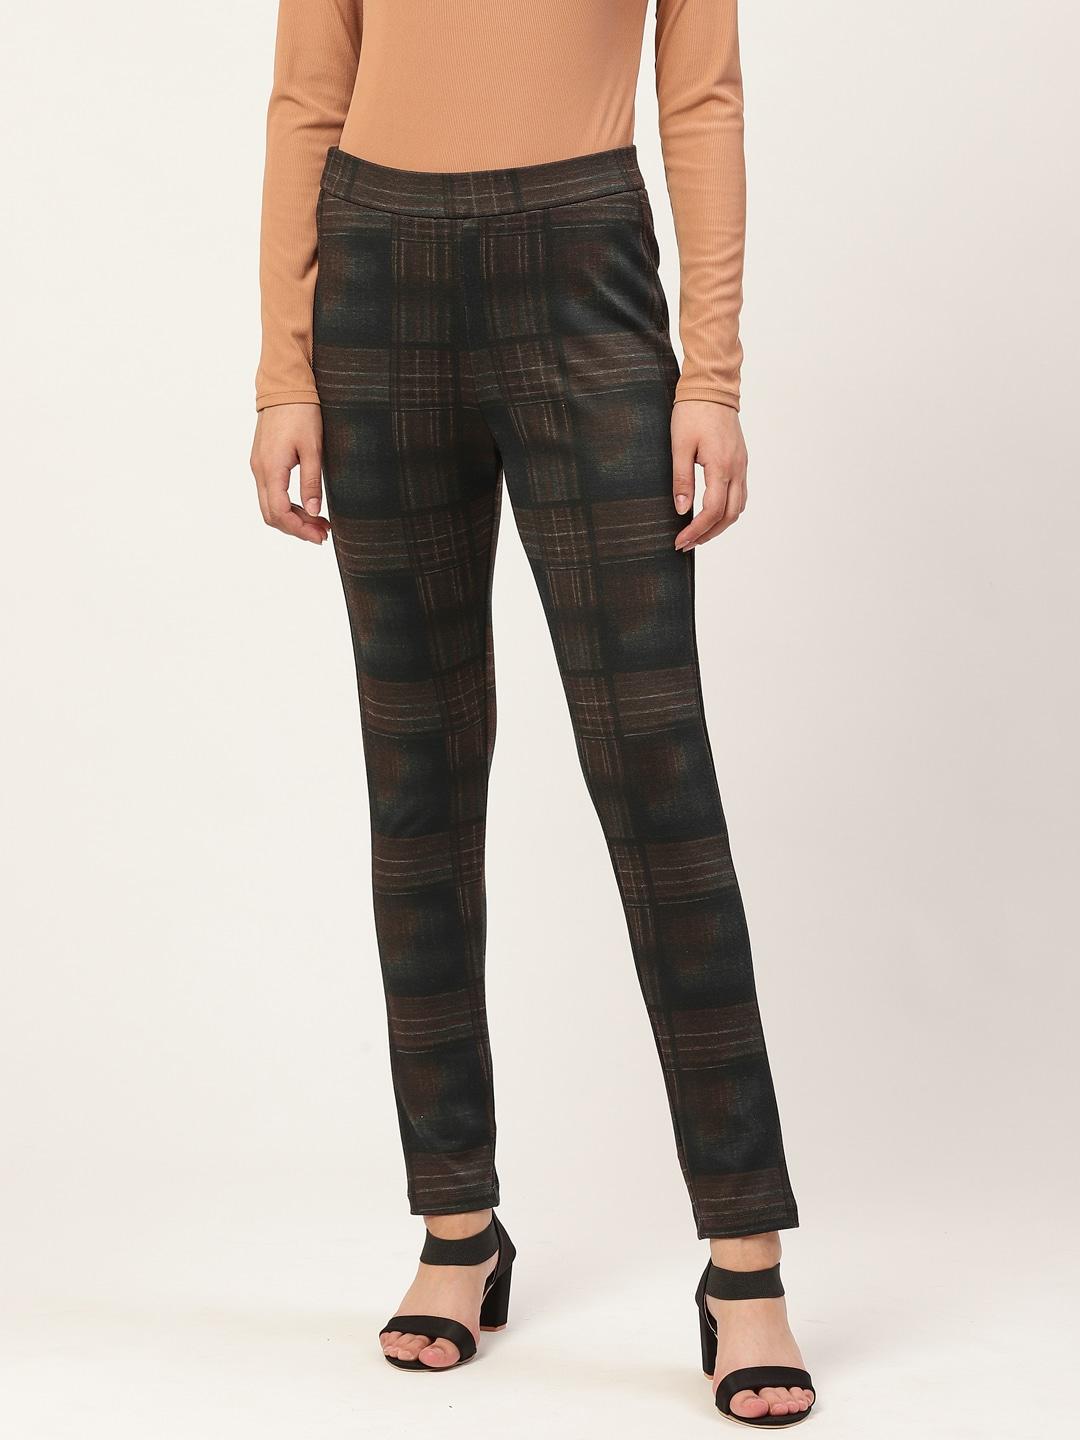 xpose-women-brown-&-black-checked-high-rise-skinny-fit-treggings